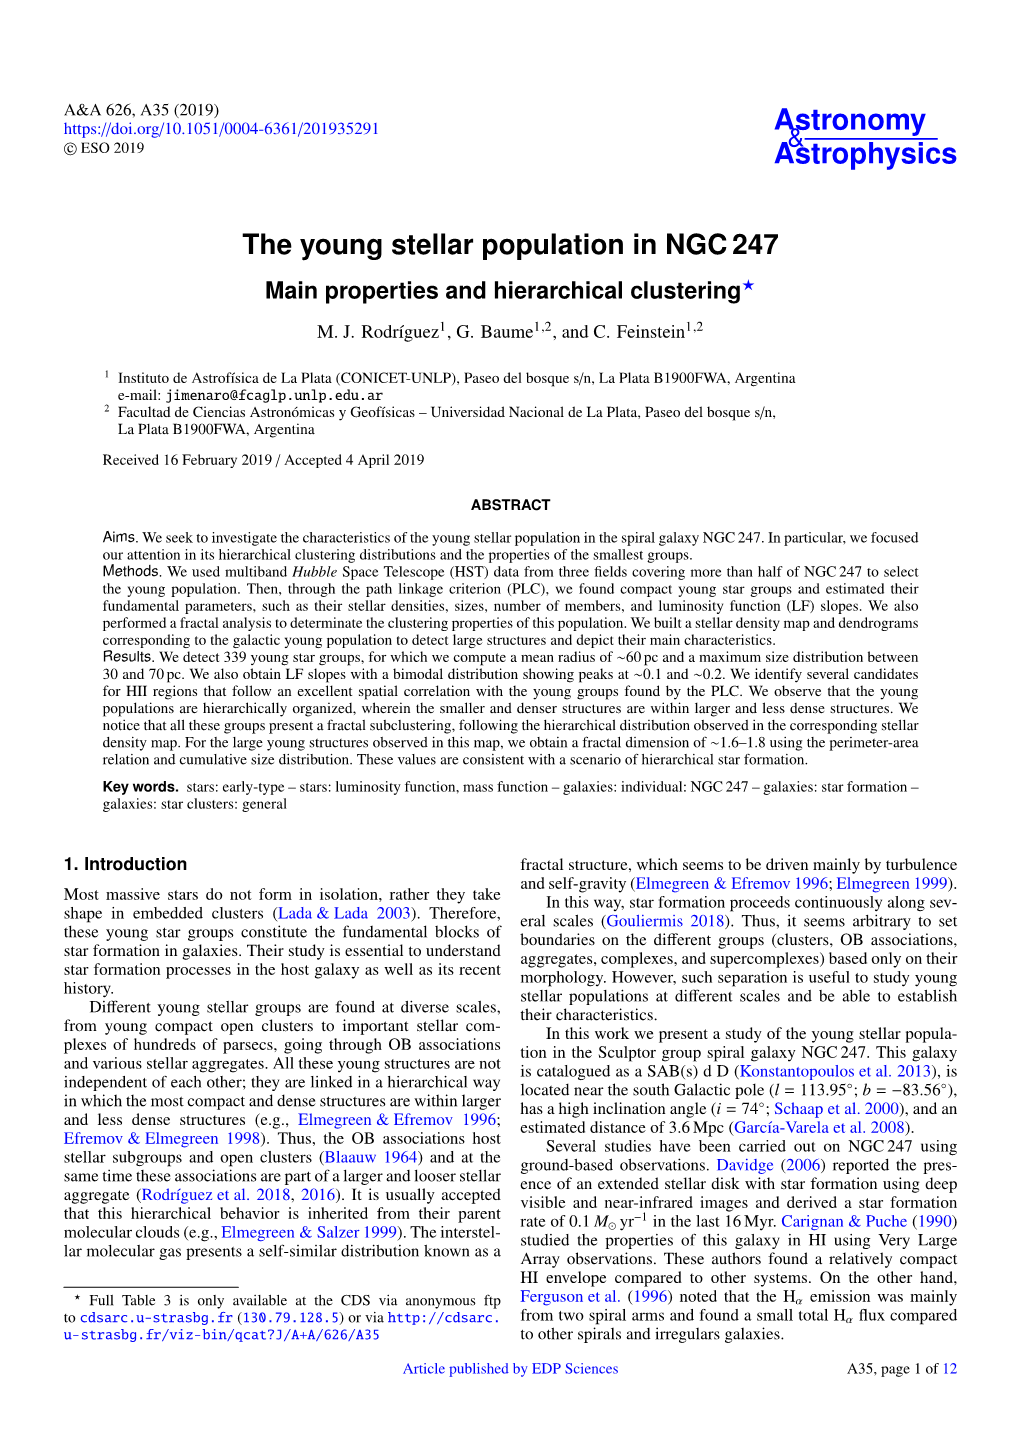 The Young Stellar Population in NGC 247 Main Properties and Hierarchical Clustering?